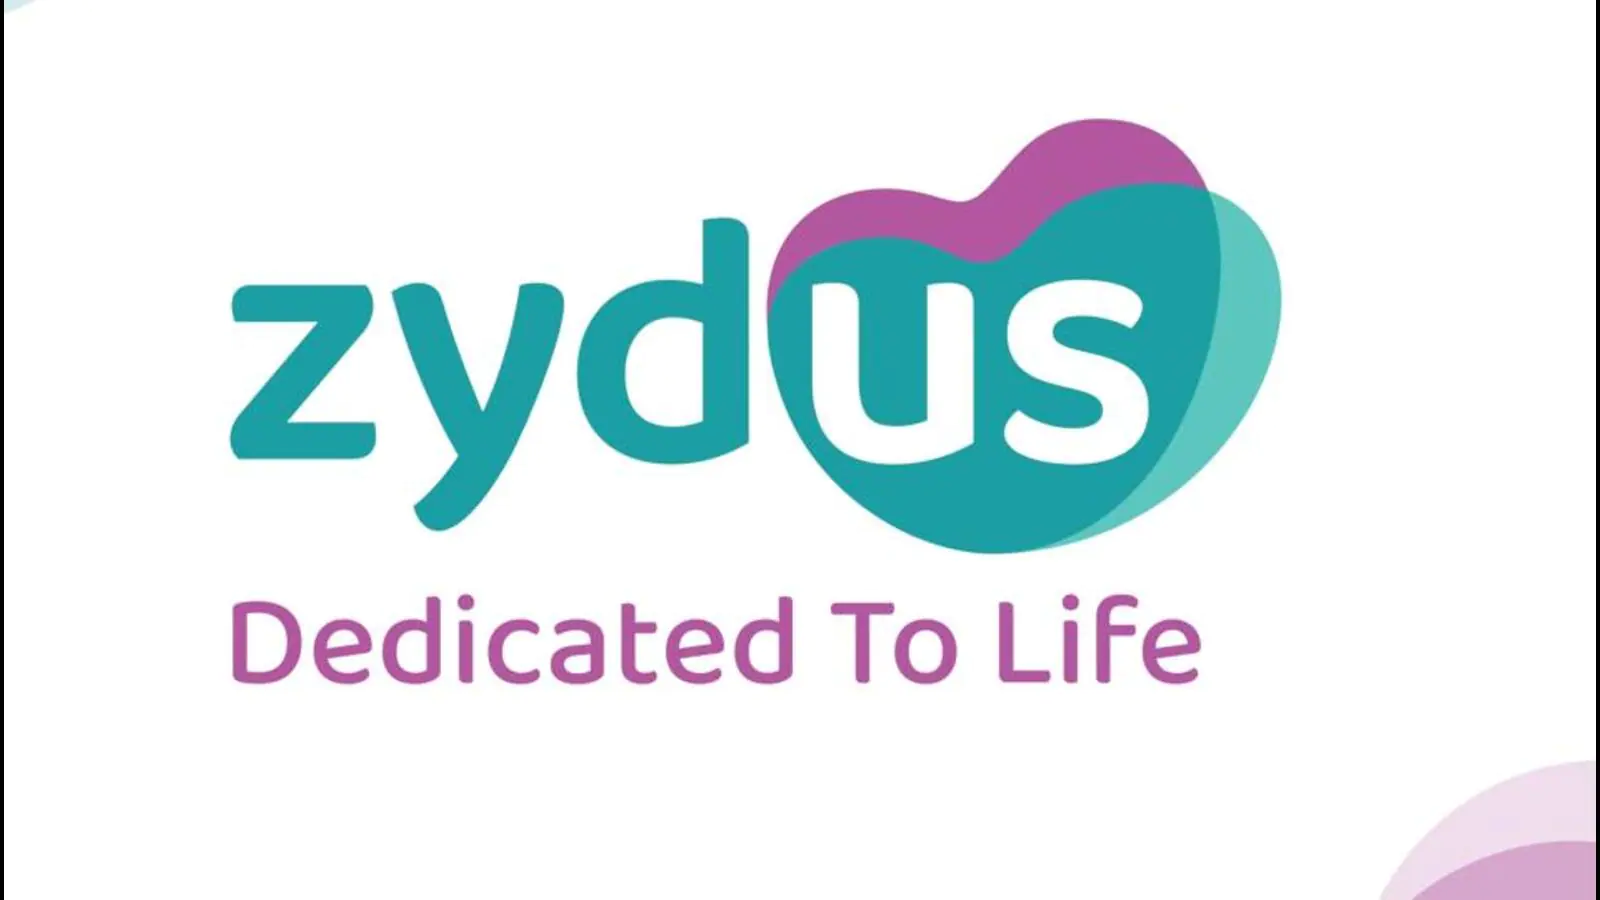 Zydus gets DCGI nod for oral drug to treat anemia in CKD patients